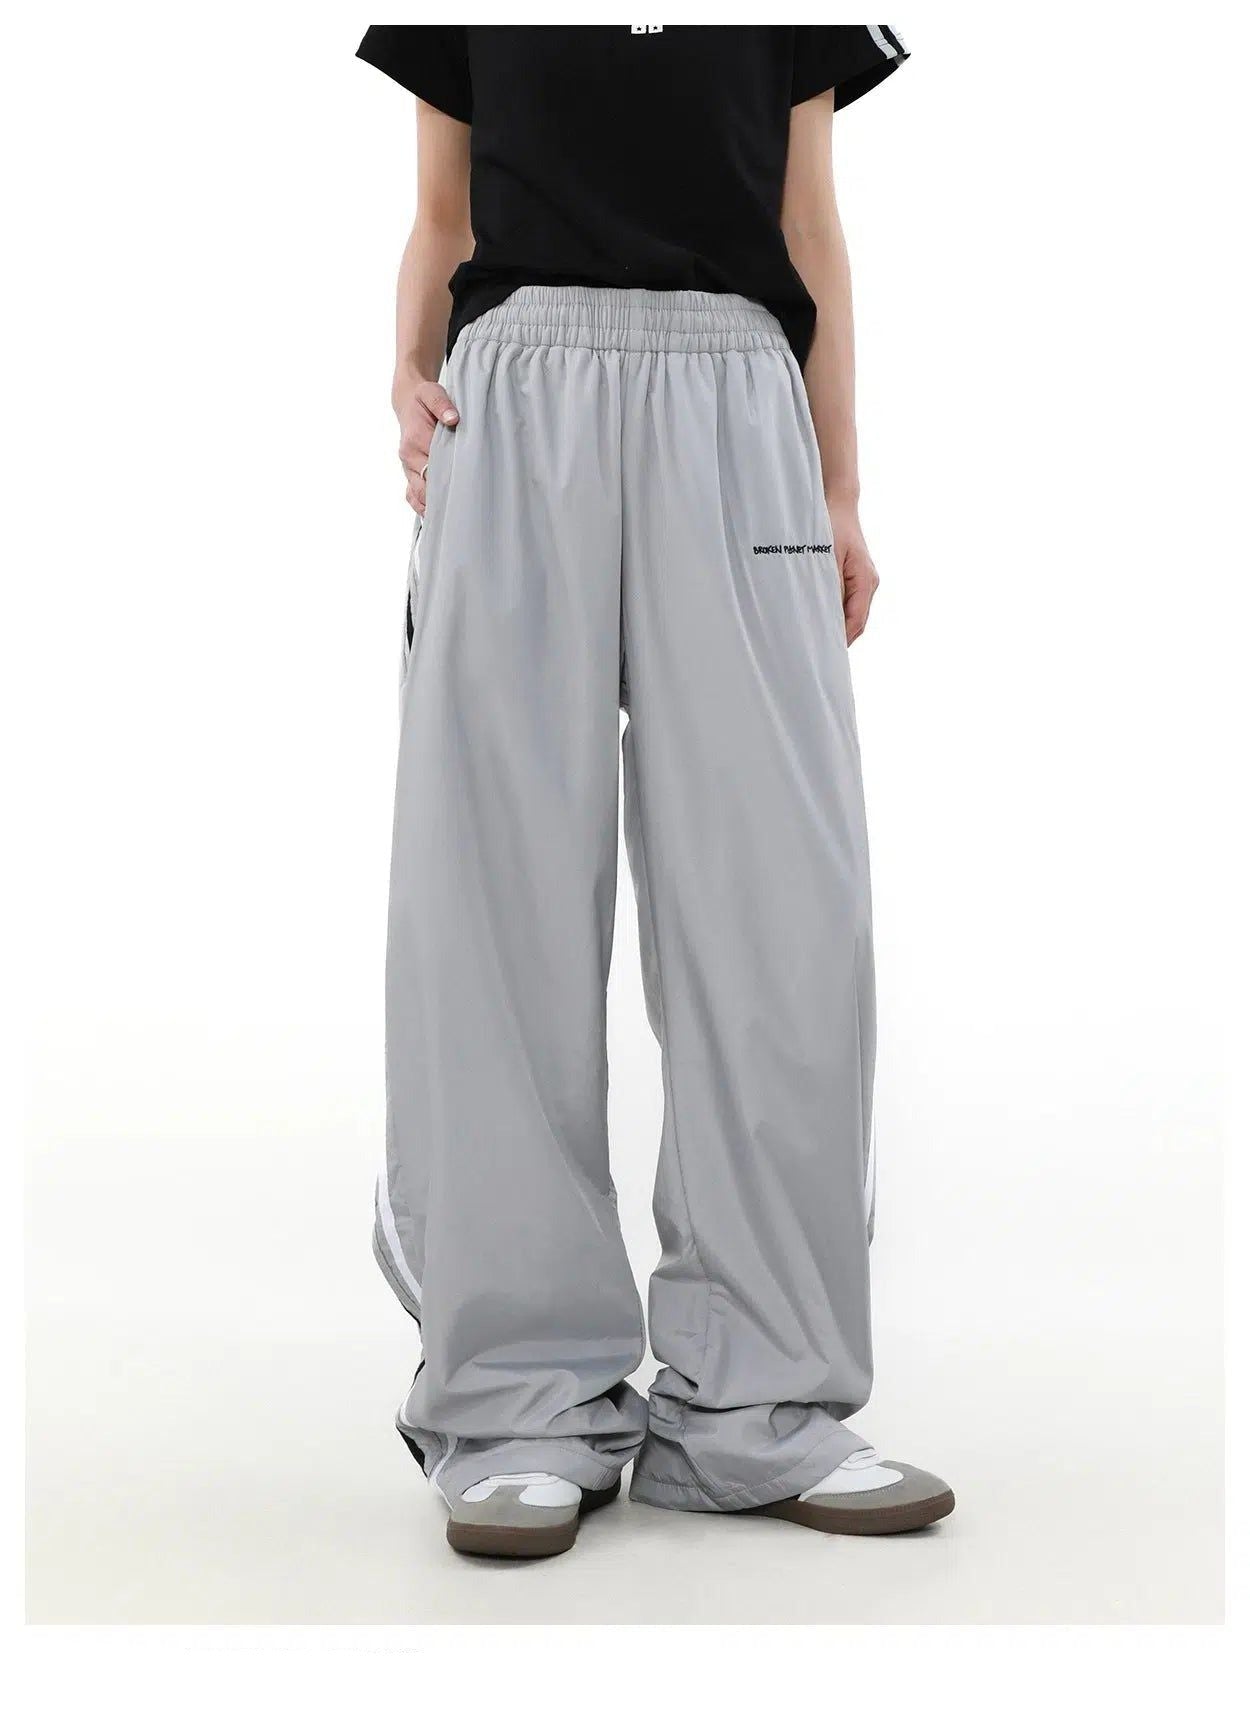 Elastic Side Stripe Track Pants Korean Street Fashion Pants By Mr Nearly Shop Online at OH Vault